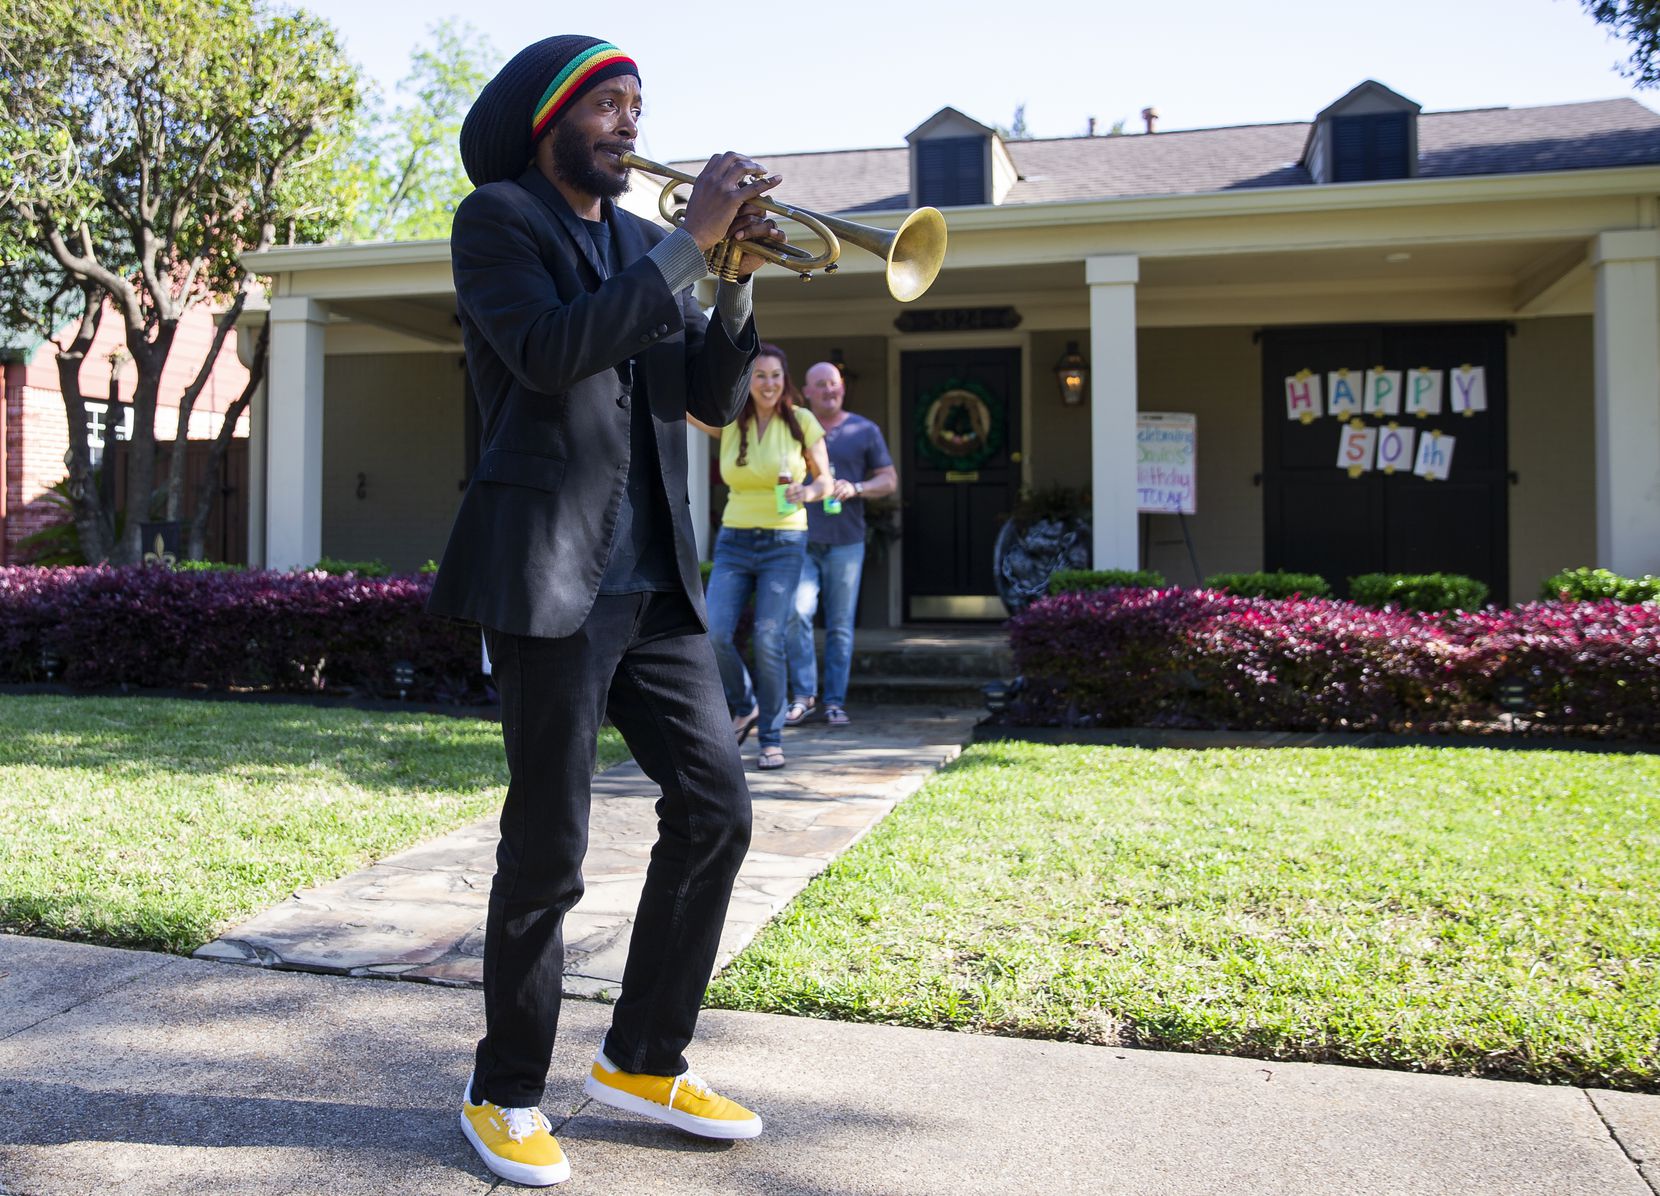 Trumpeter Alcedrick Todd (left) performs for David Hannah's 50th birthday outside of his...